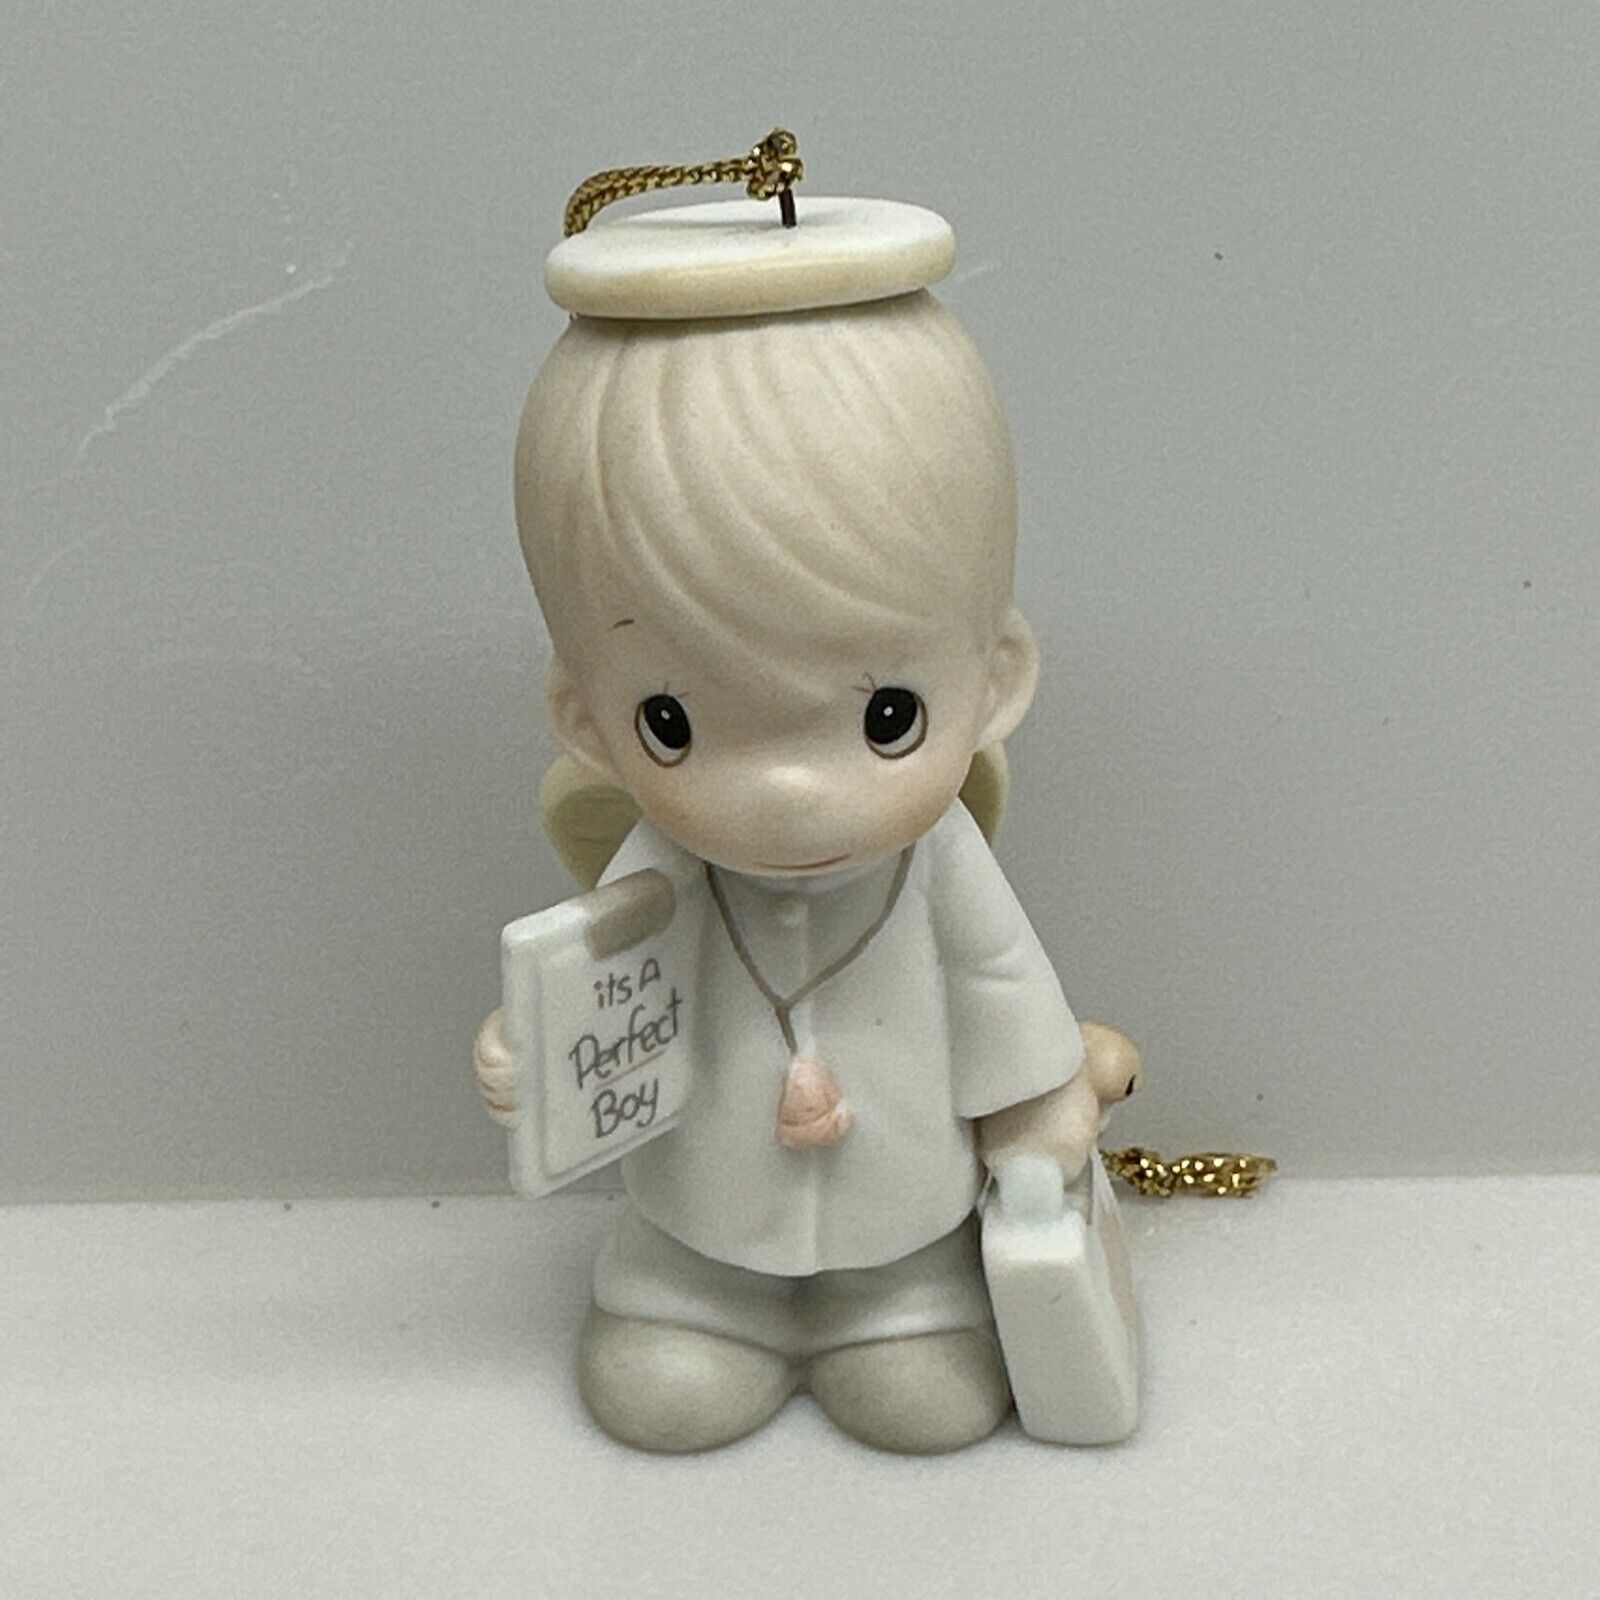 Precious Moments Angel 1986 It's A Perfect Boy Doctor 102415 Christmas Ornament